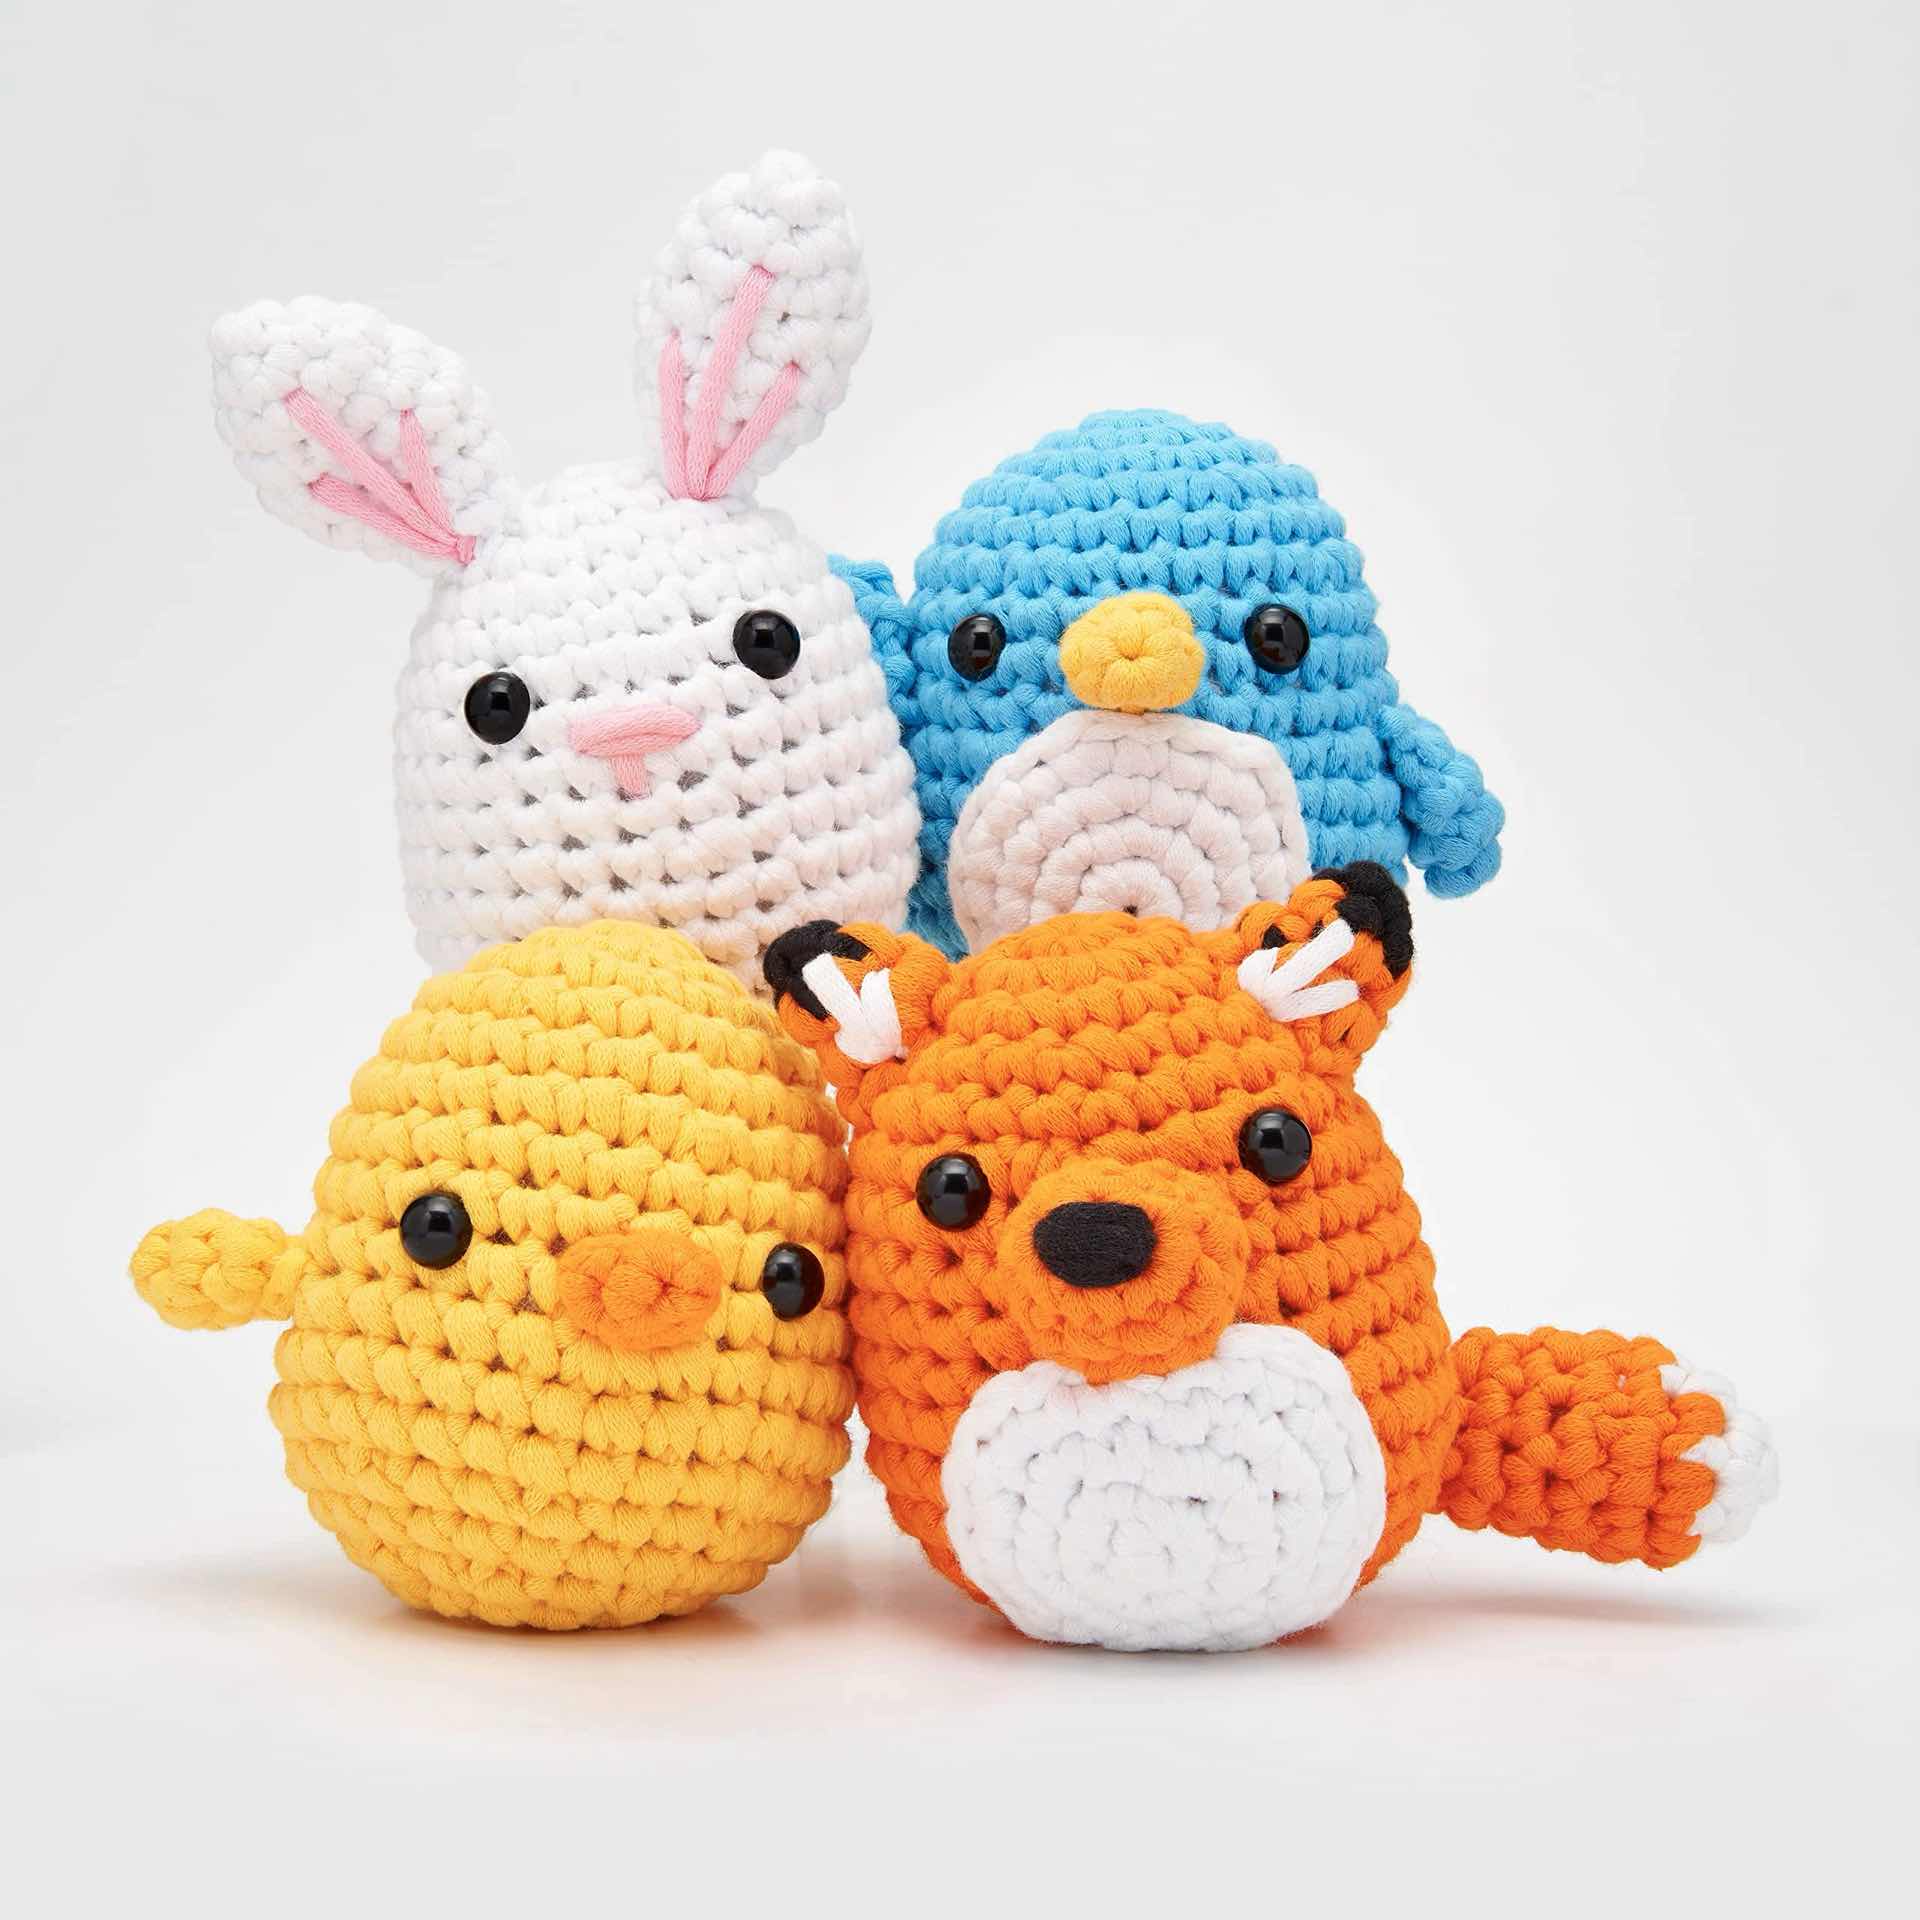 the-woobles-crochet-amigurumi-kits-for-beginners-characters